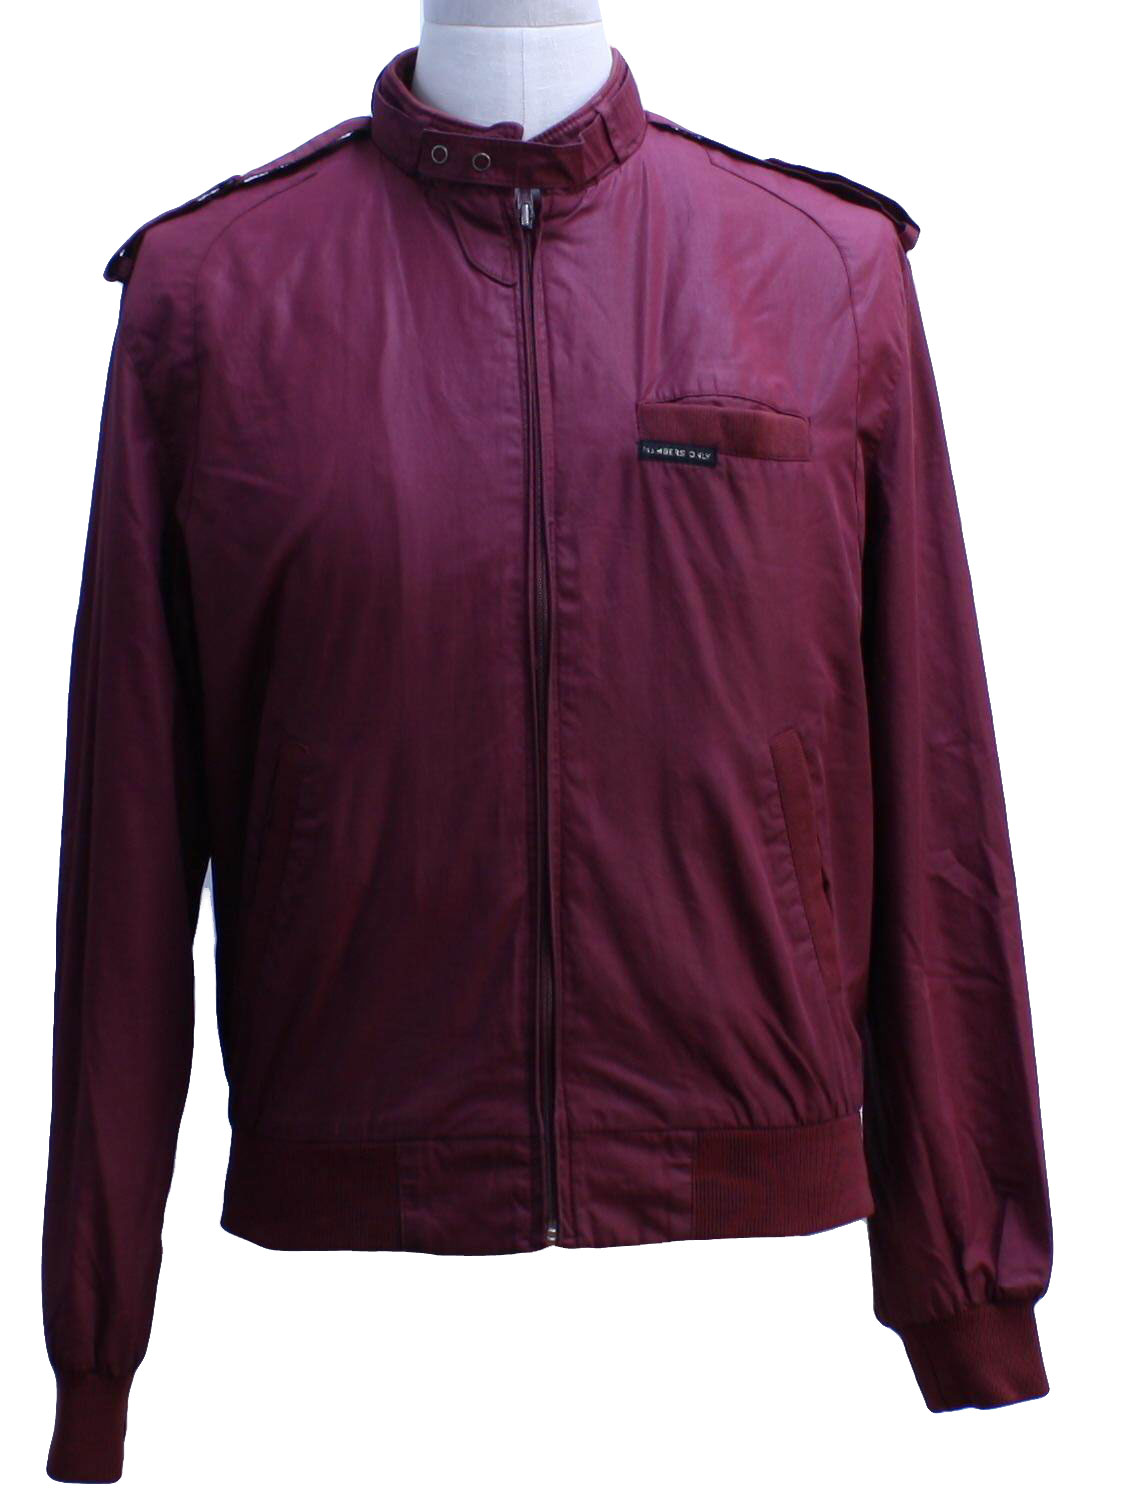 Retro 80's Jacket: 80s -Members Only- Mens maroon cotton polyester ...